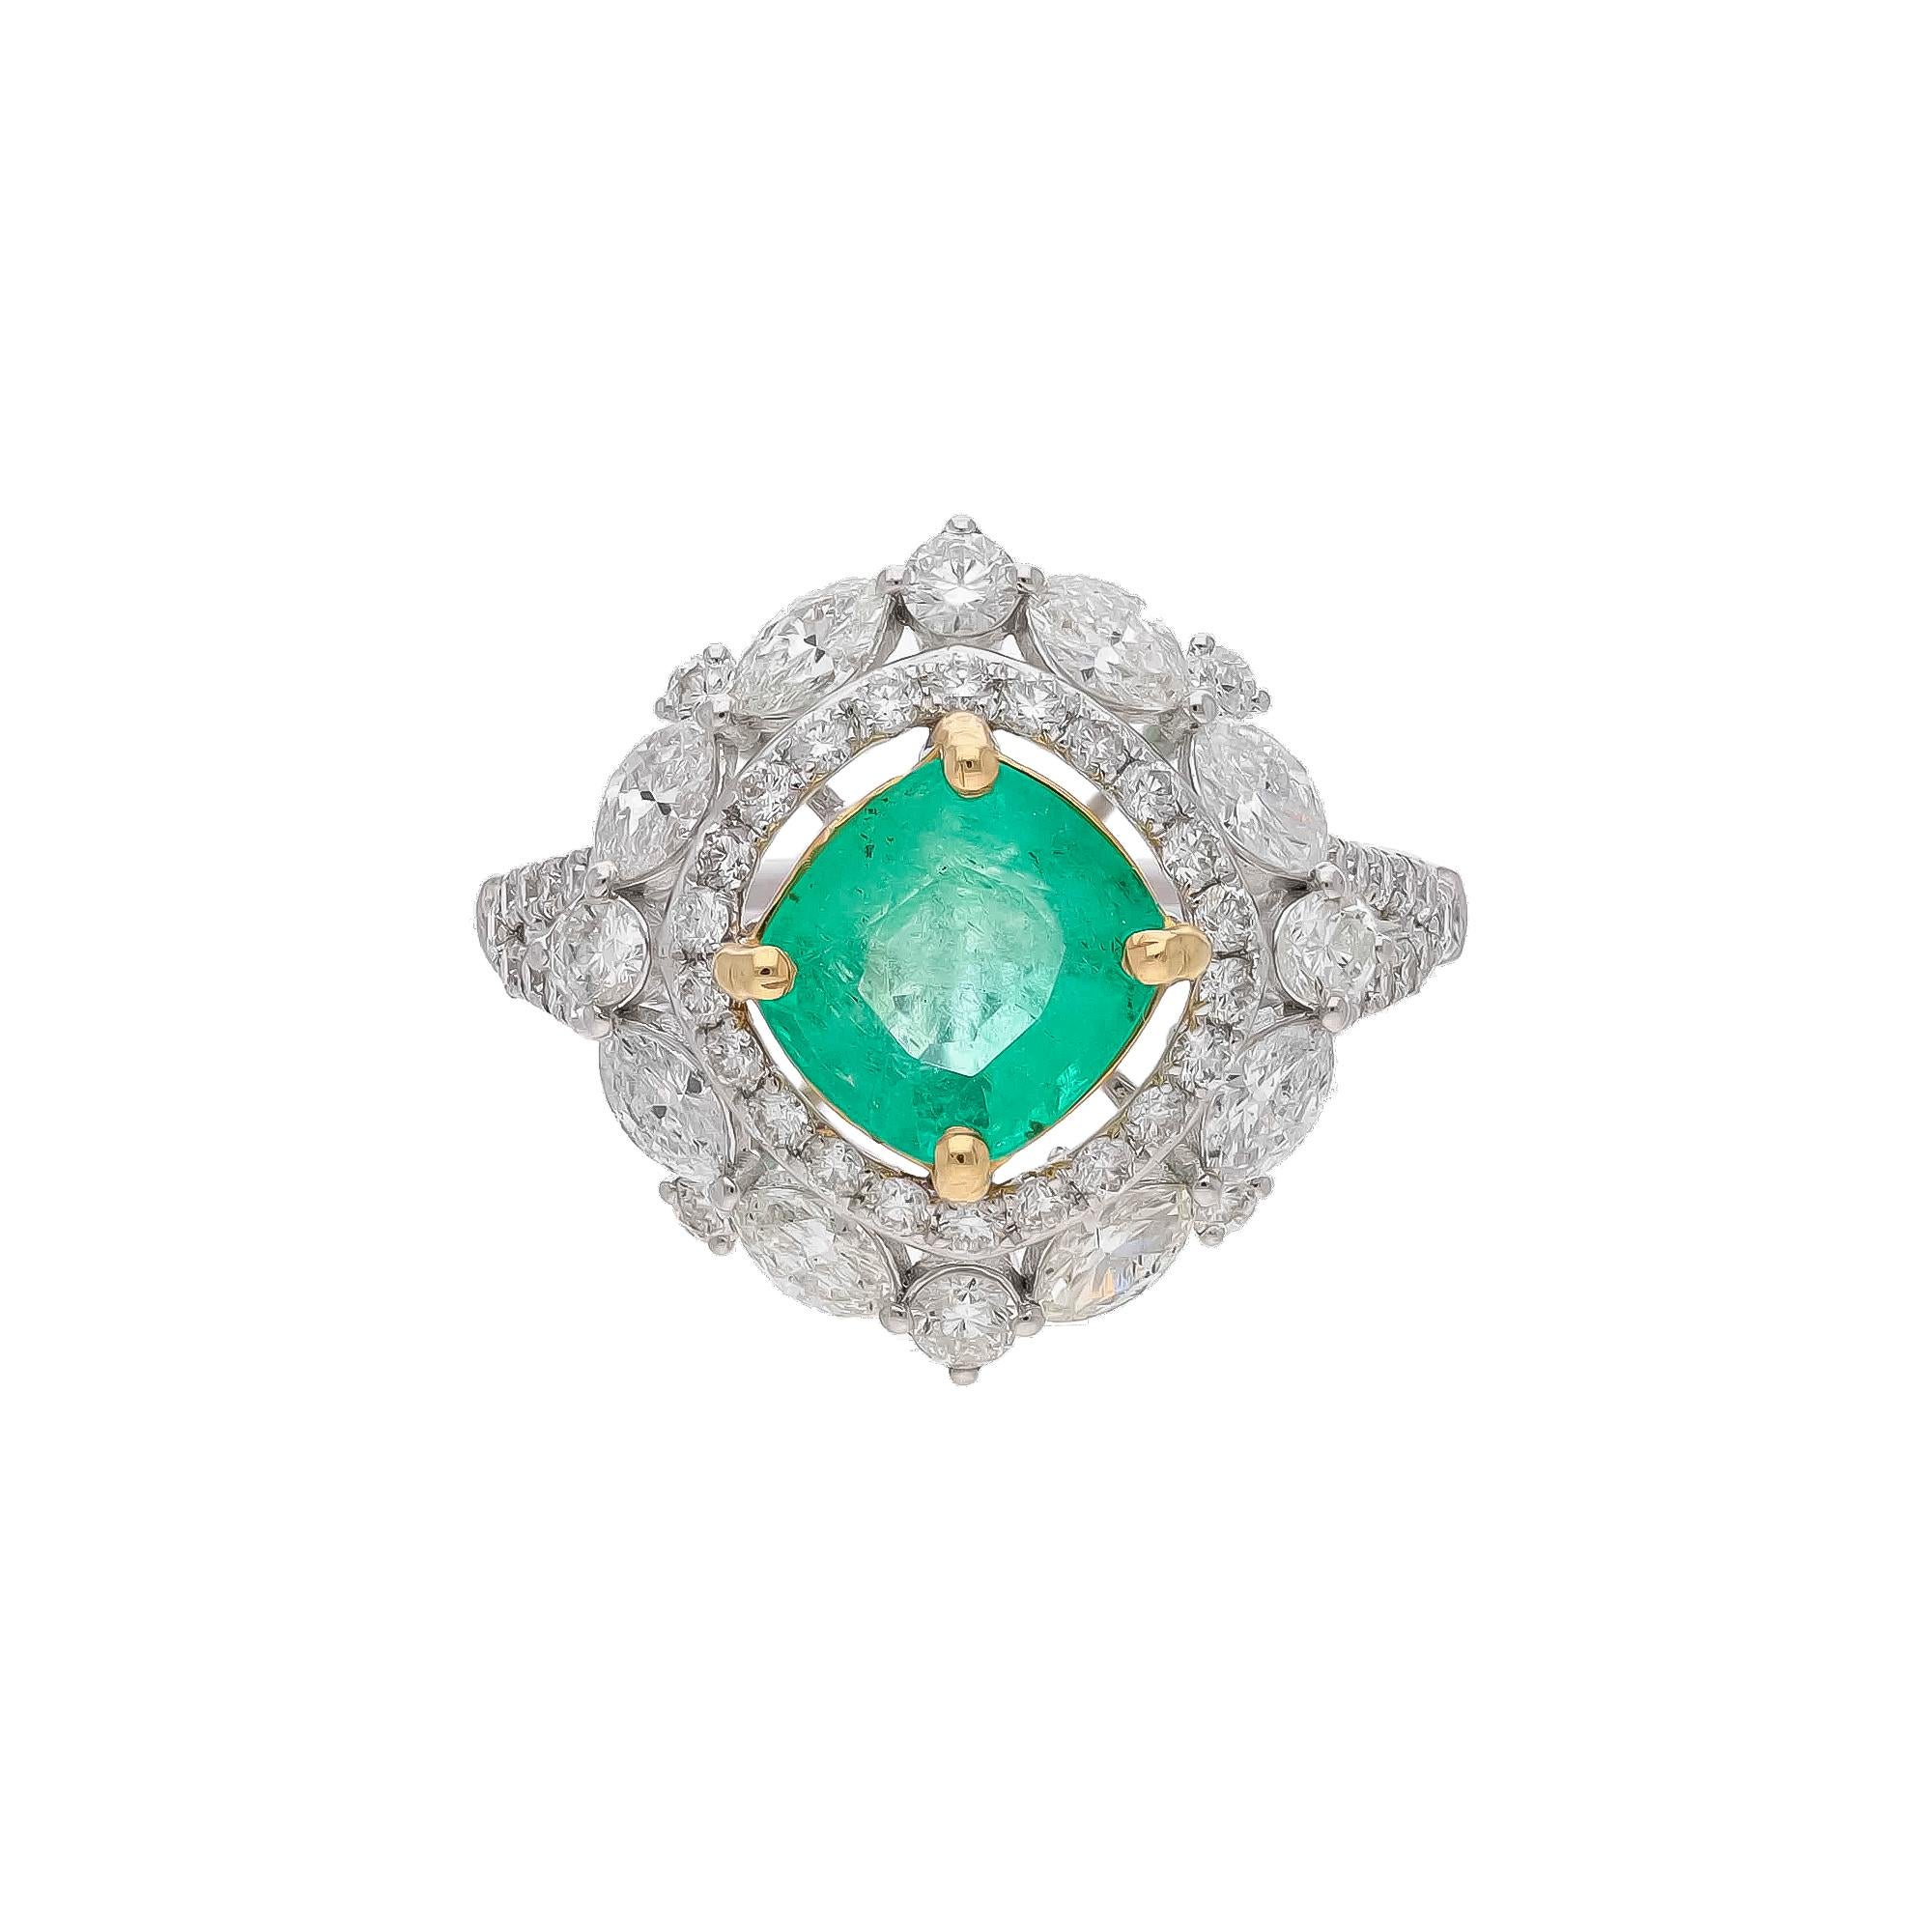 This is a natural Columbian Emerald ring with diamonds and 18k gold. The emeralds are very high quality and very good quality diamonds the clarity is vsi and G colour


Emeralds : 1.64 carats
diamonds : 1.46 carats
gold : 4.010 gms

This is a Brand